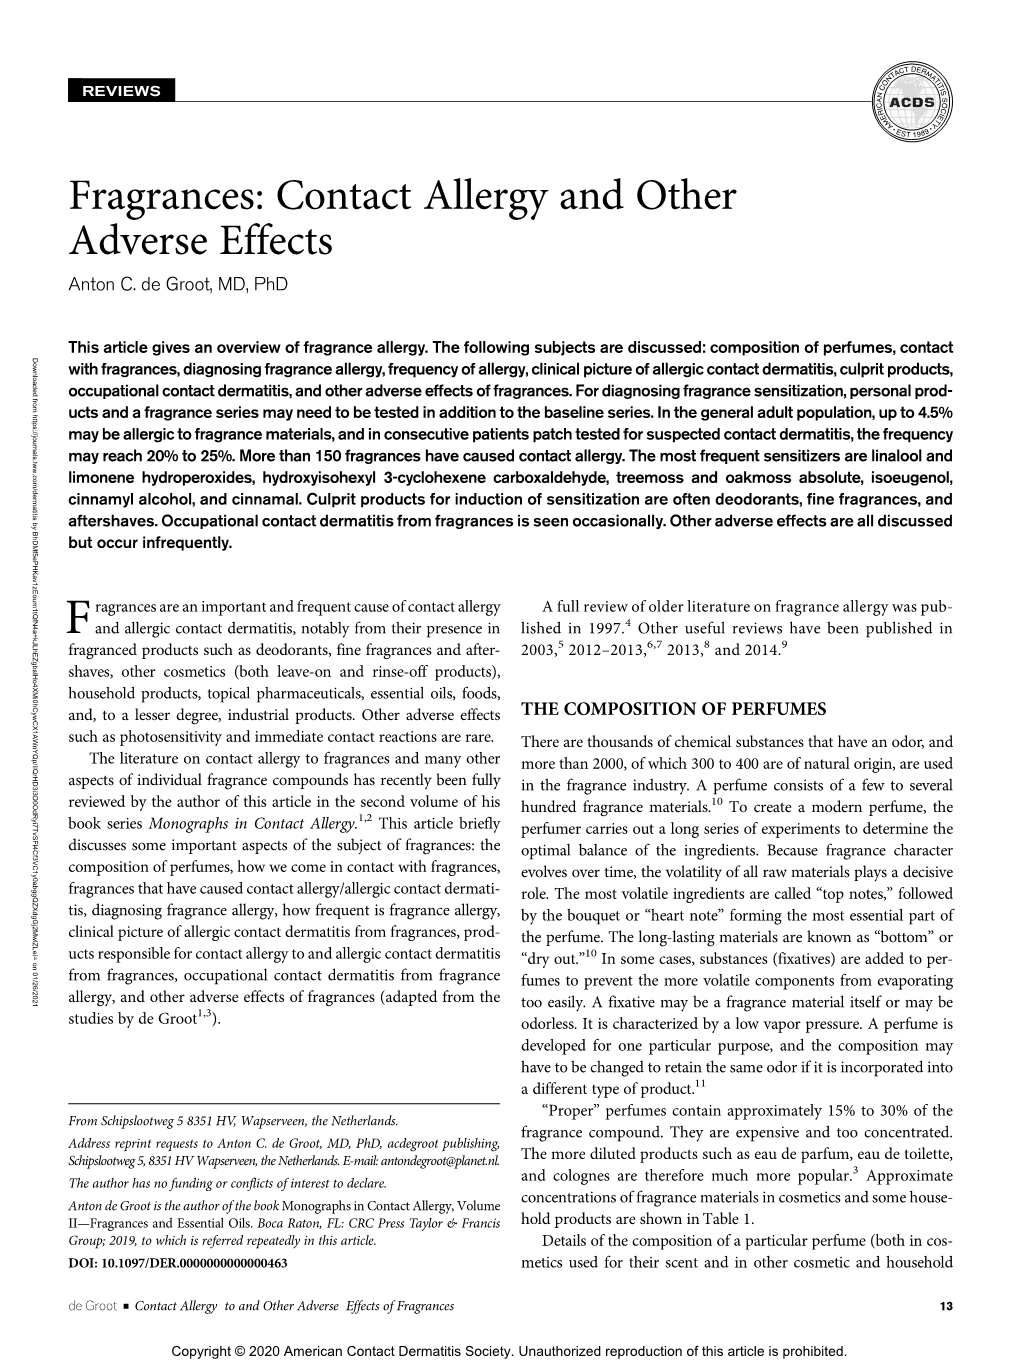 Fragrances: Contact Allergy and Other Adverse Effects